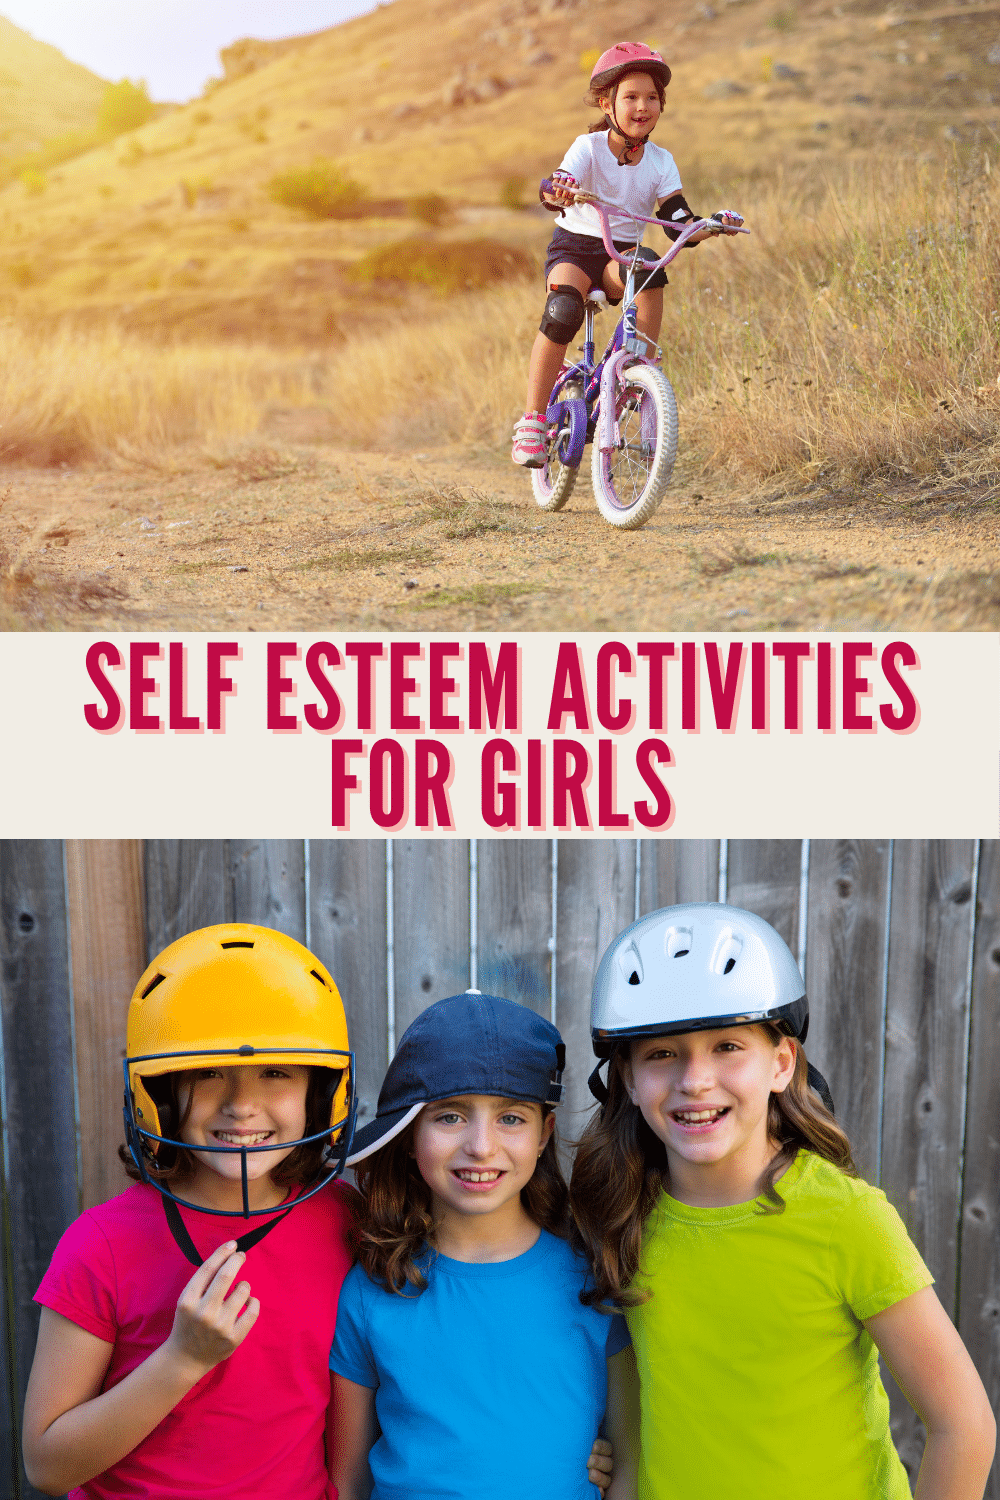 If you've got a daughter, you probably need these self esteem activities for girls that you can do with her to build her up! #selfesteem #girls #raisinggirls via @wondermomwannab